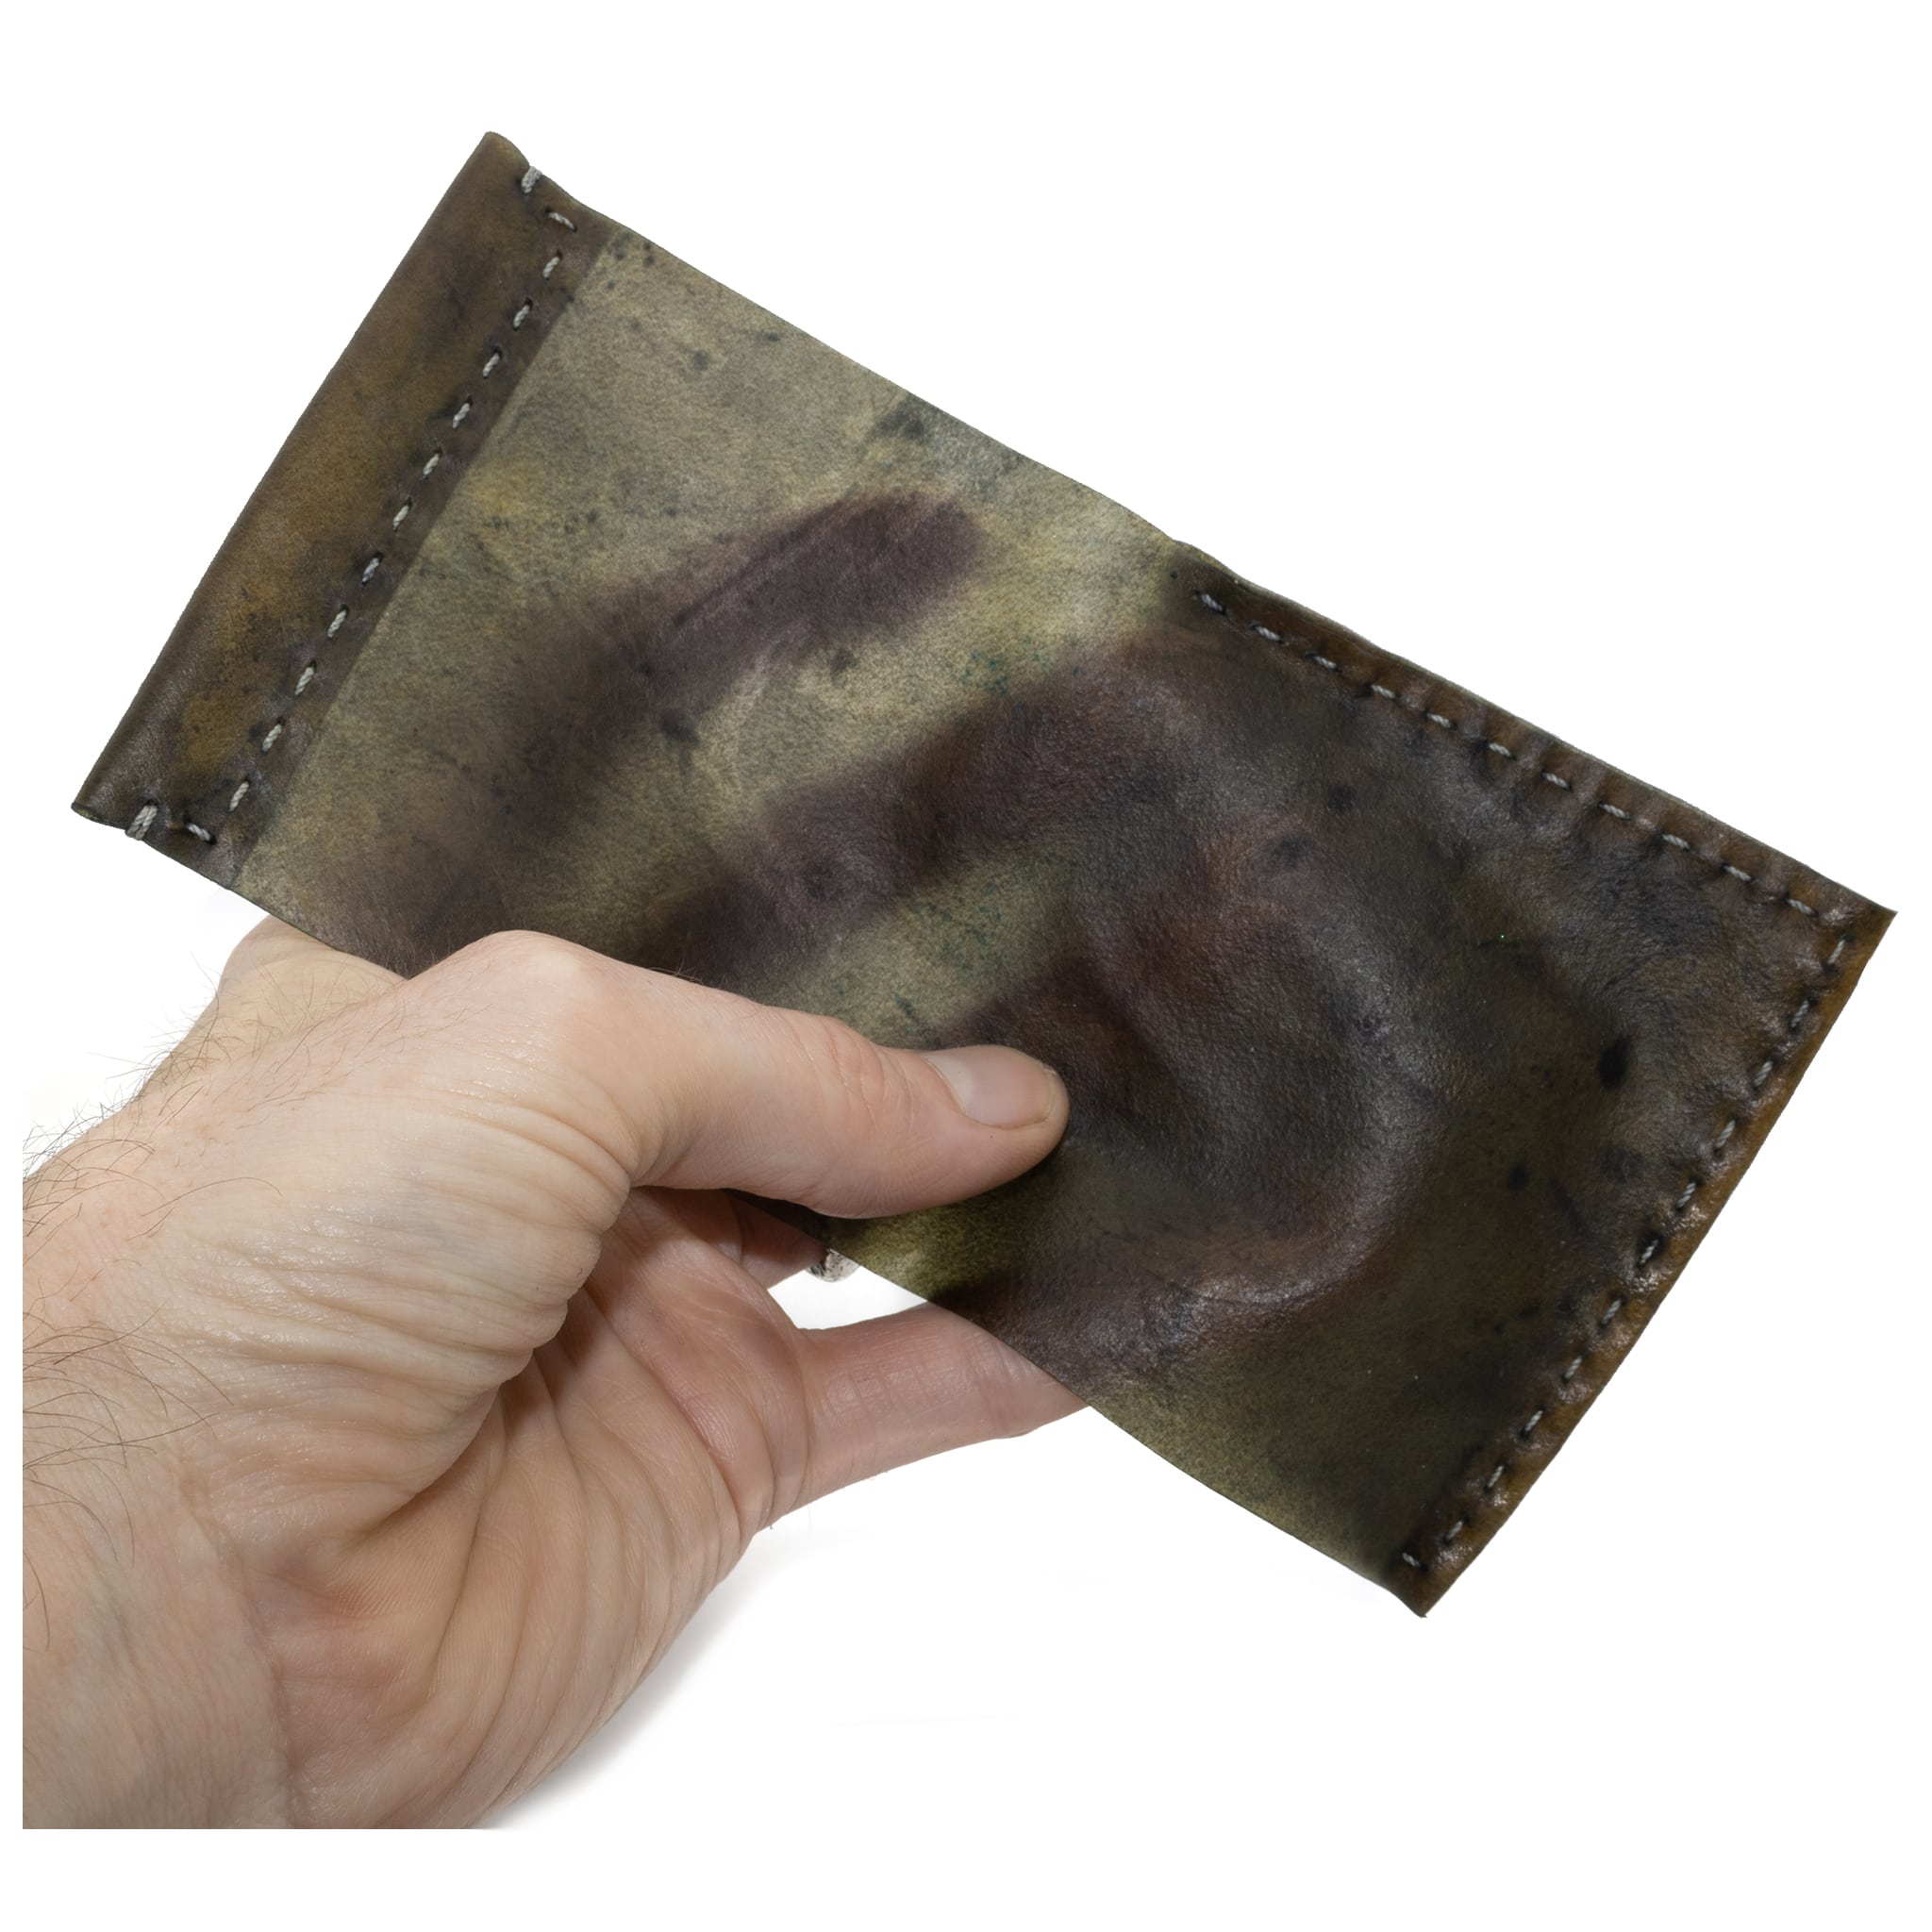 atelier skn | cold dye transparent horse leather one piece bifold wallet